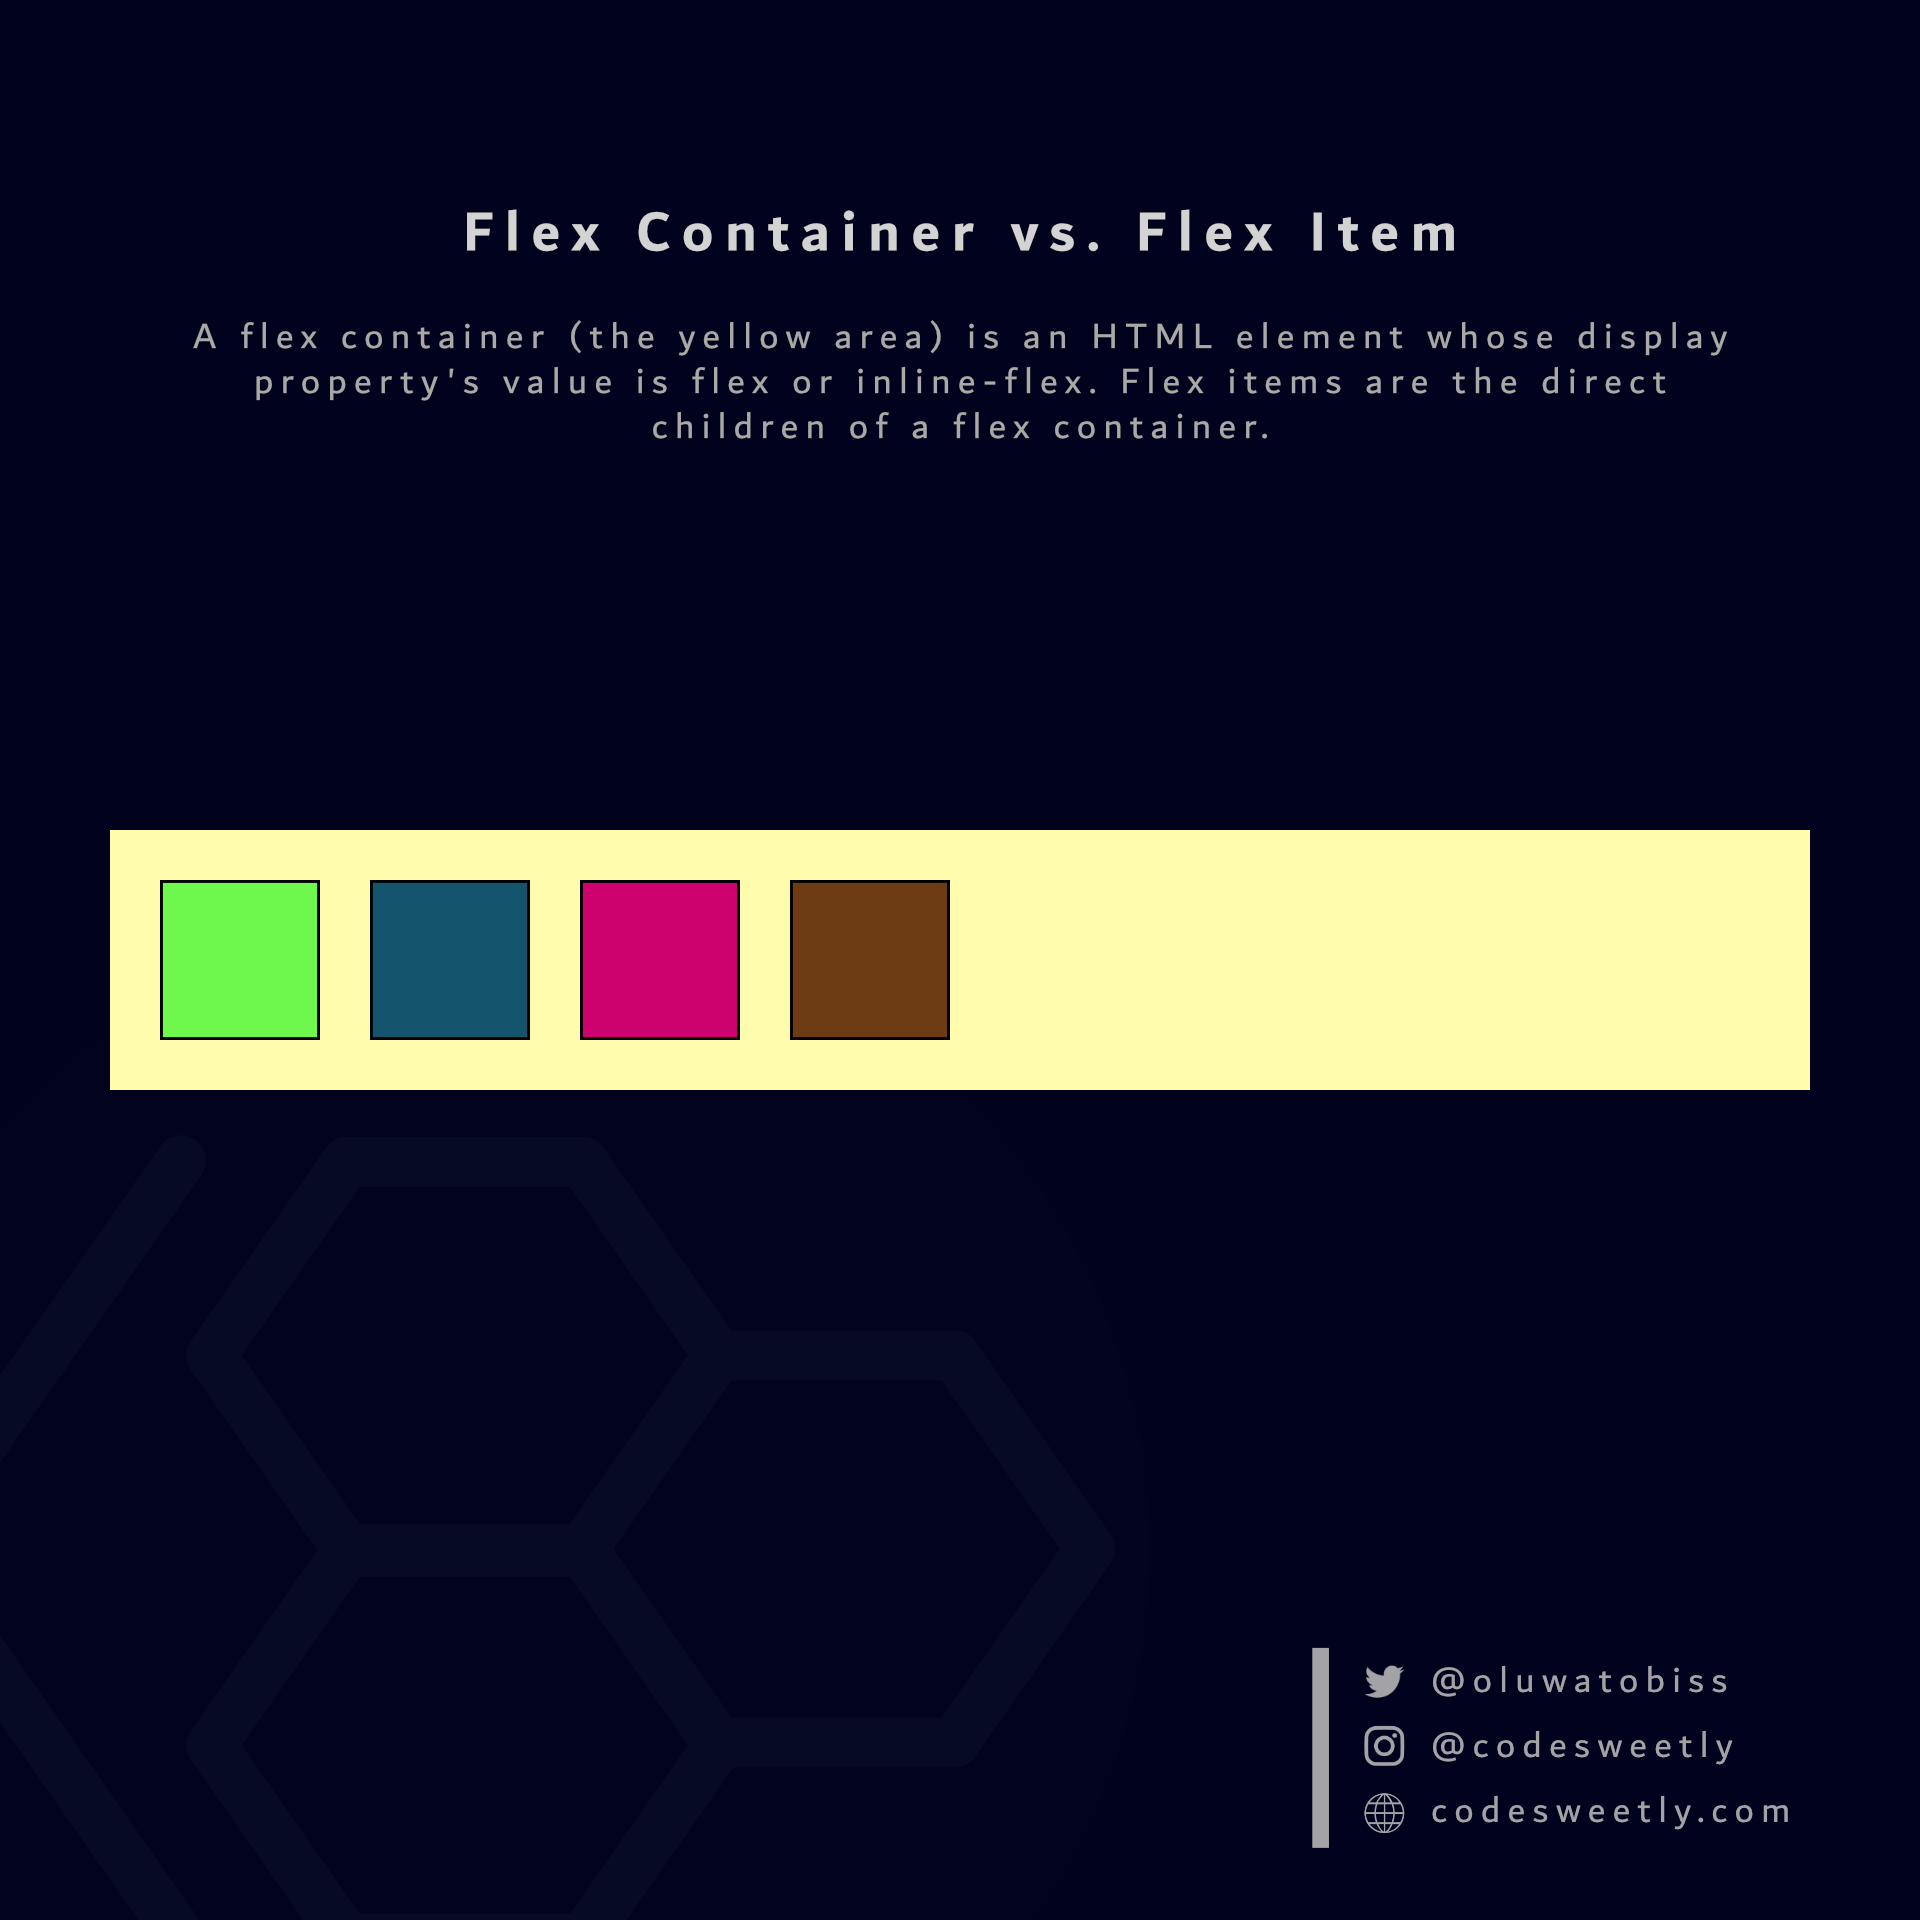 Illustration of a flex container and a flex item